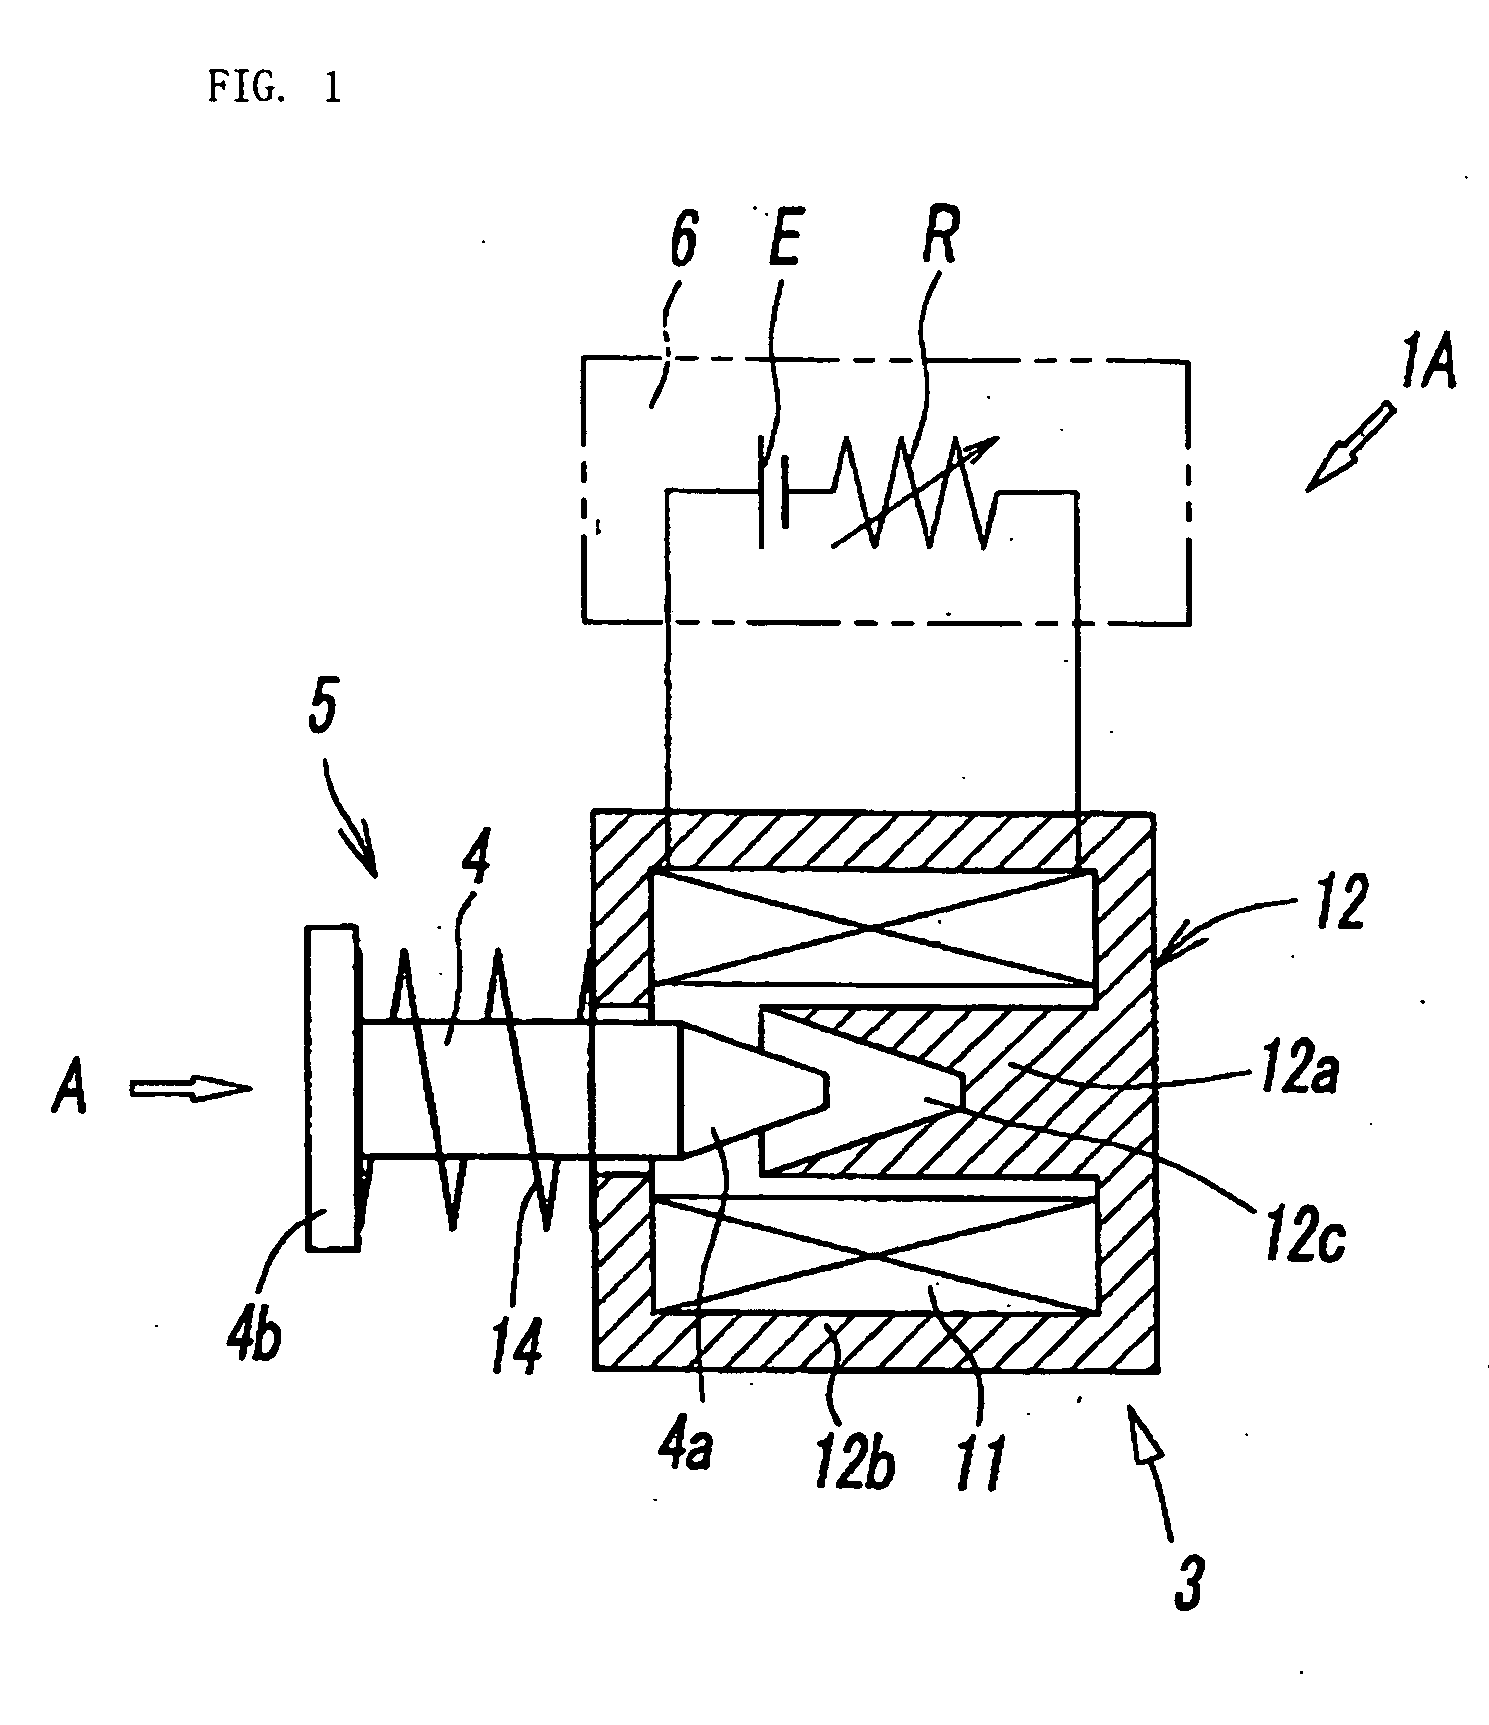 Linear actuator capable of low-speed driving